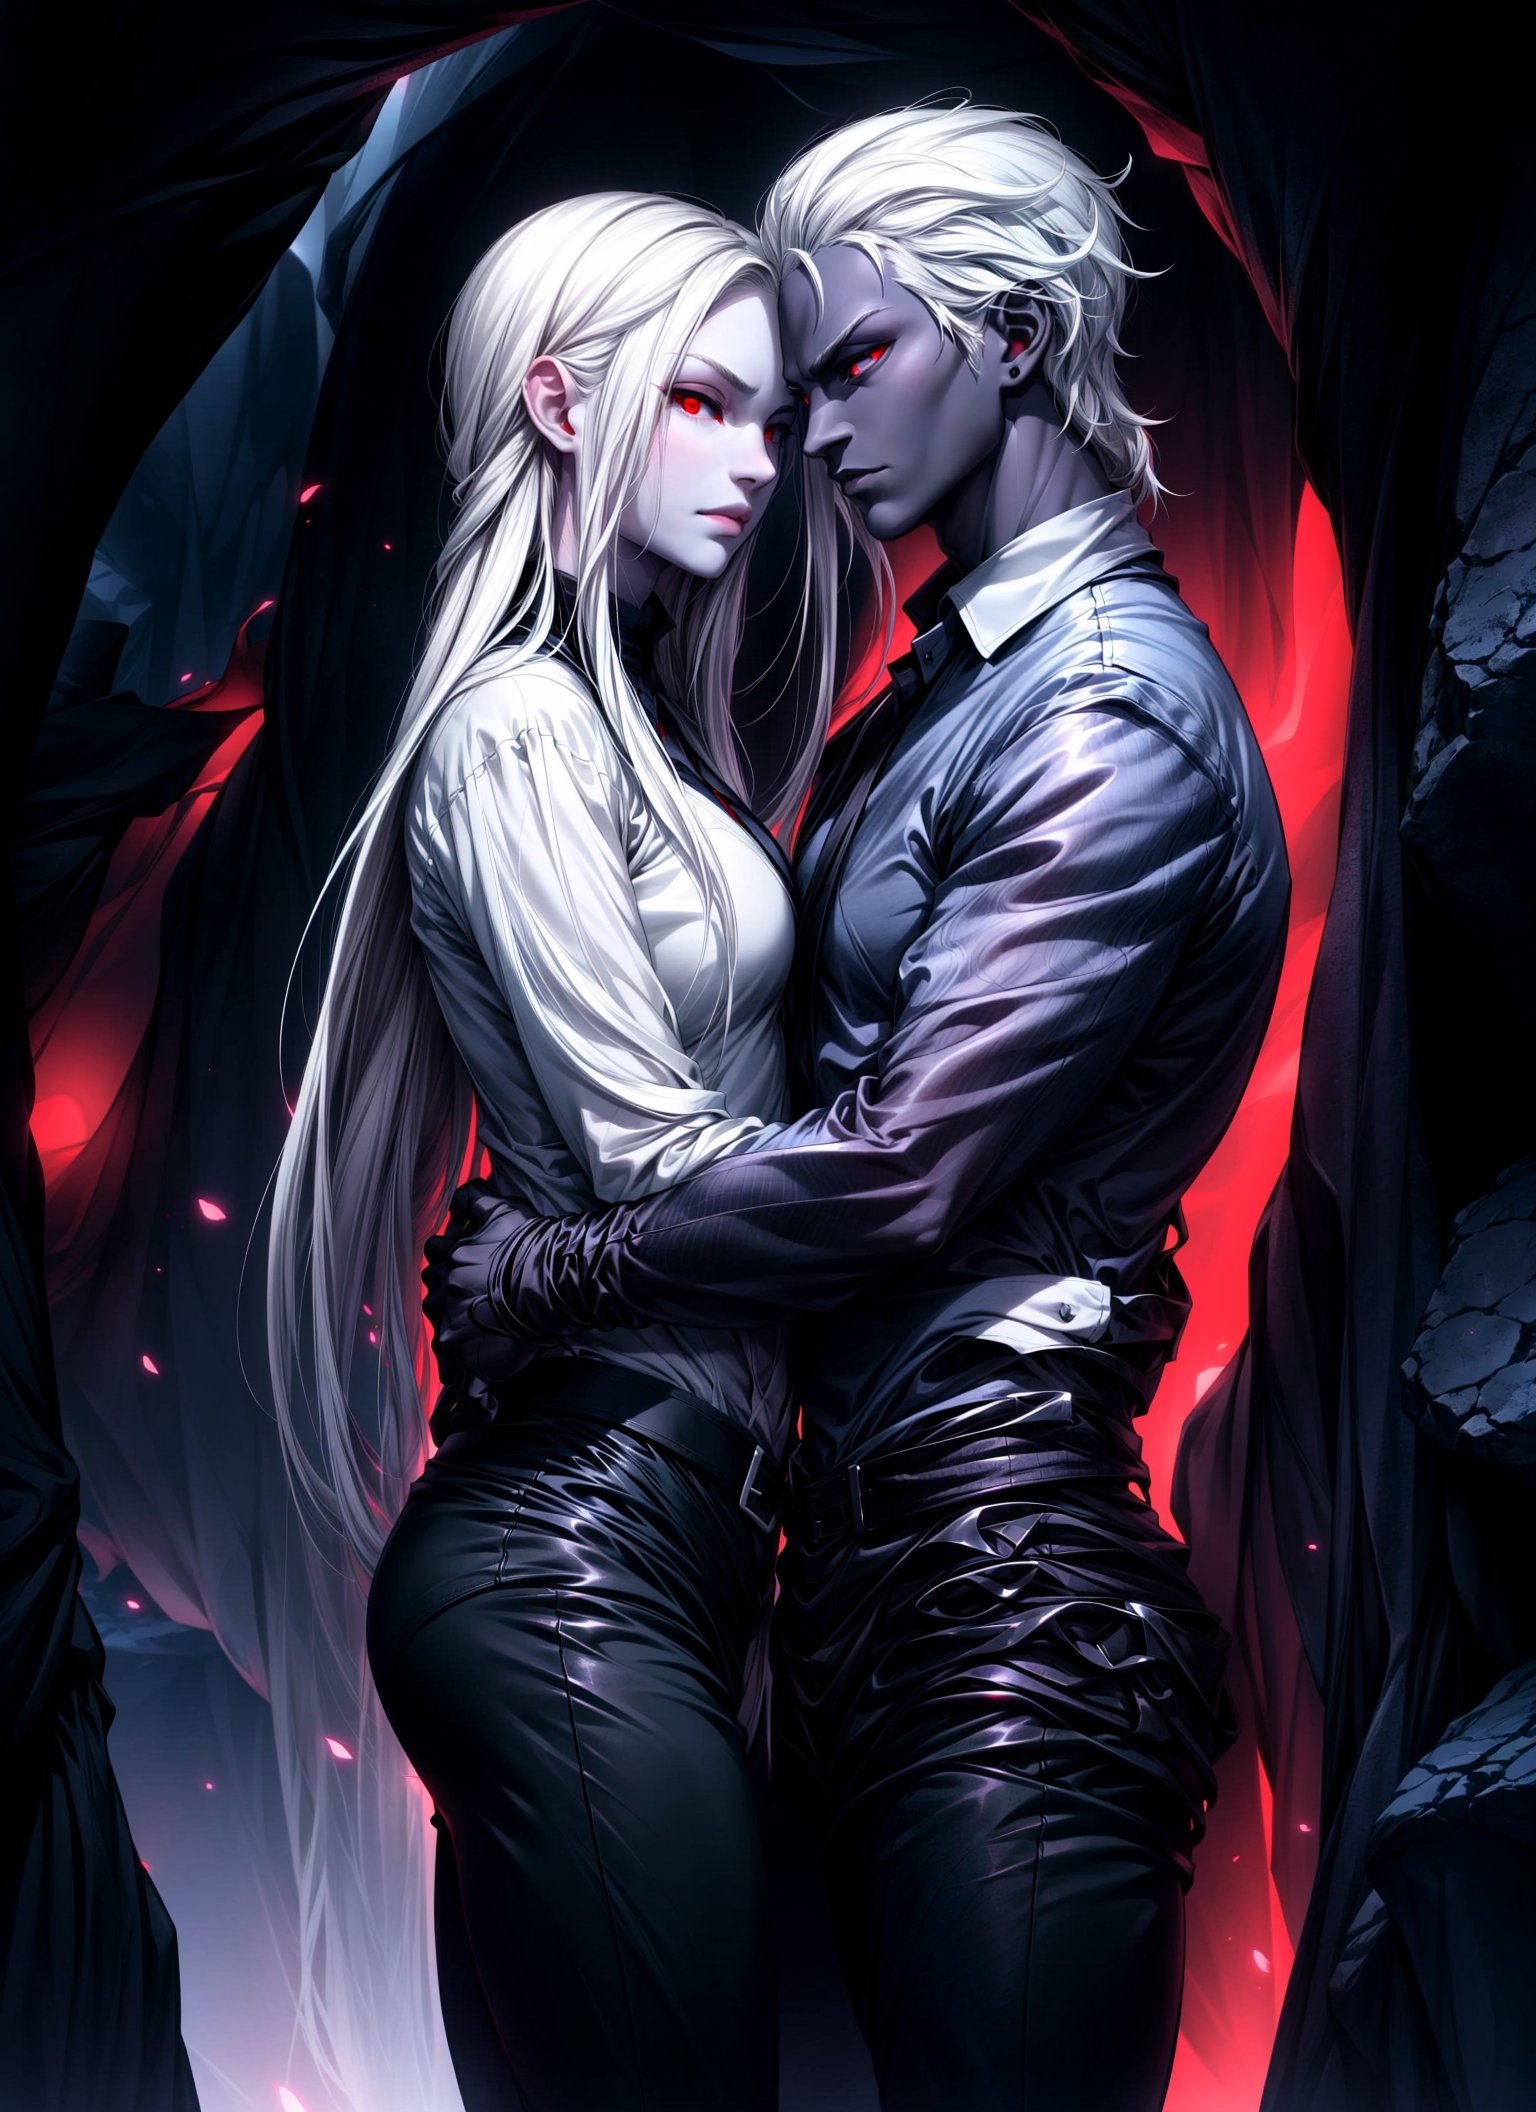 drow, Couple, Male and Female, He's taller than her, dark skin, ((red eyes)), Serious face, white open Hair, dark tight pants and shirt, standing in a Cave, Hugging each Other and Kissing, Standing tight together,